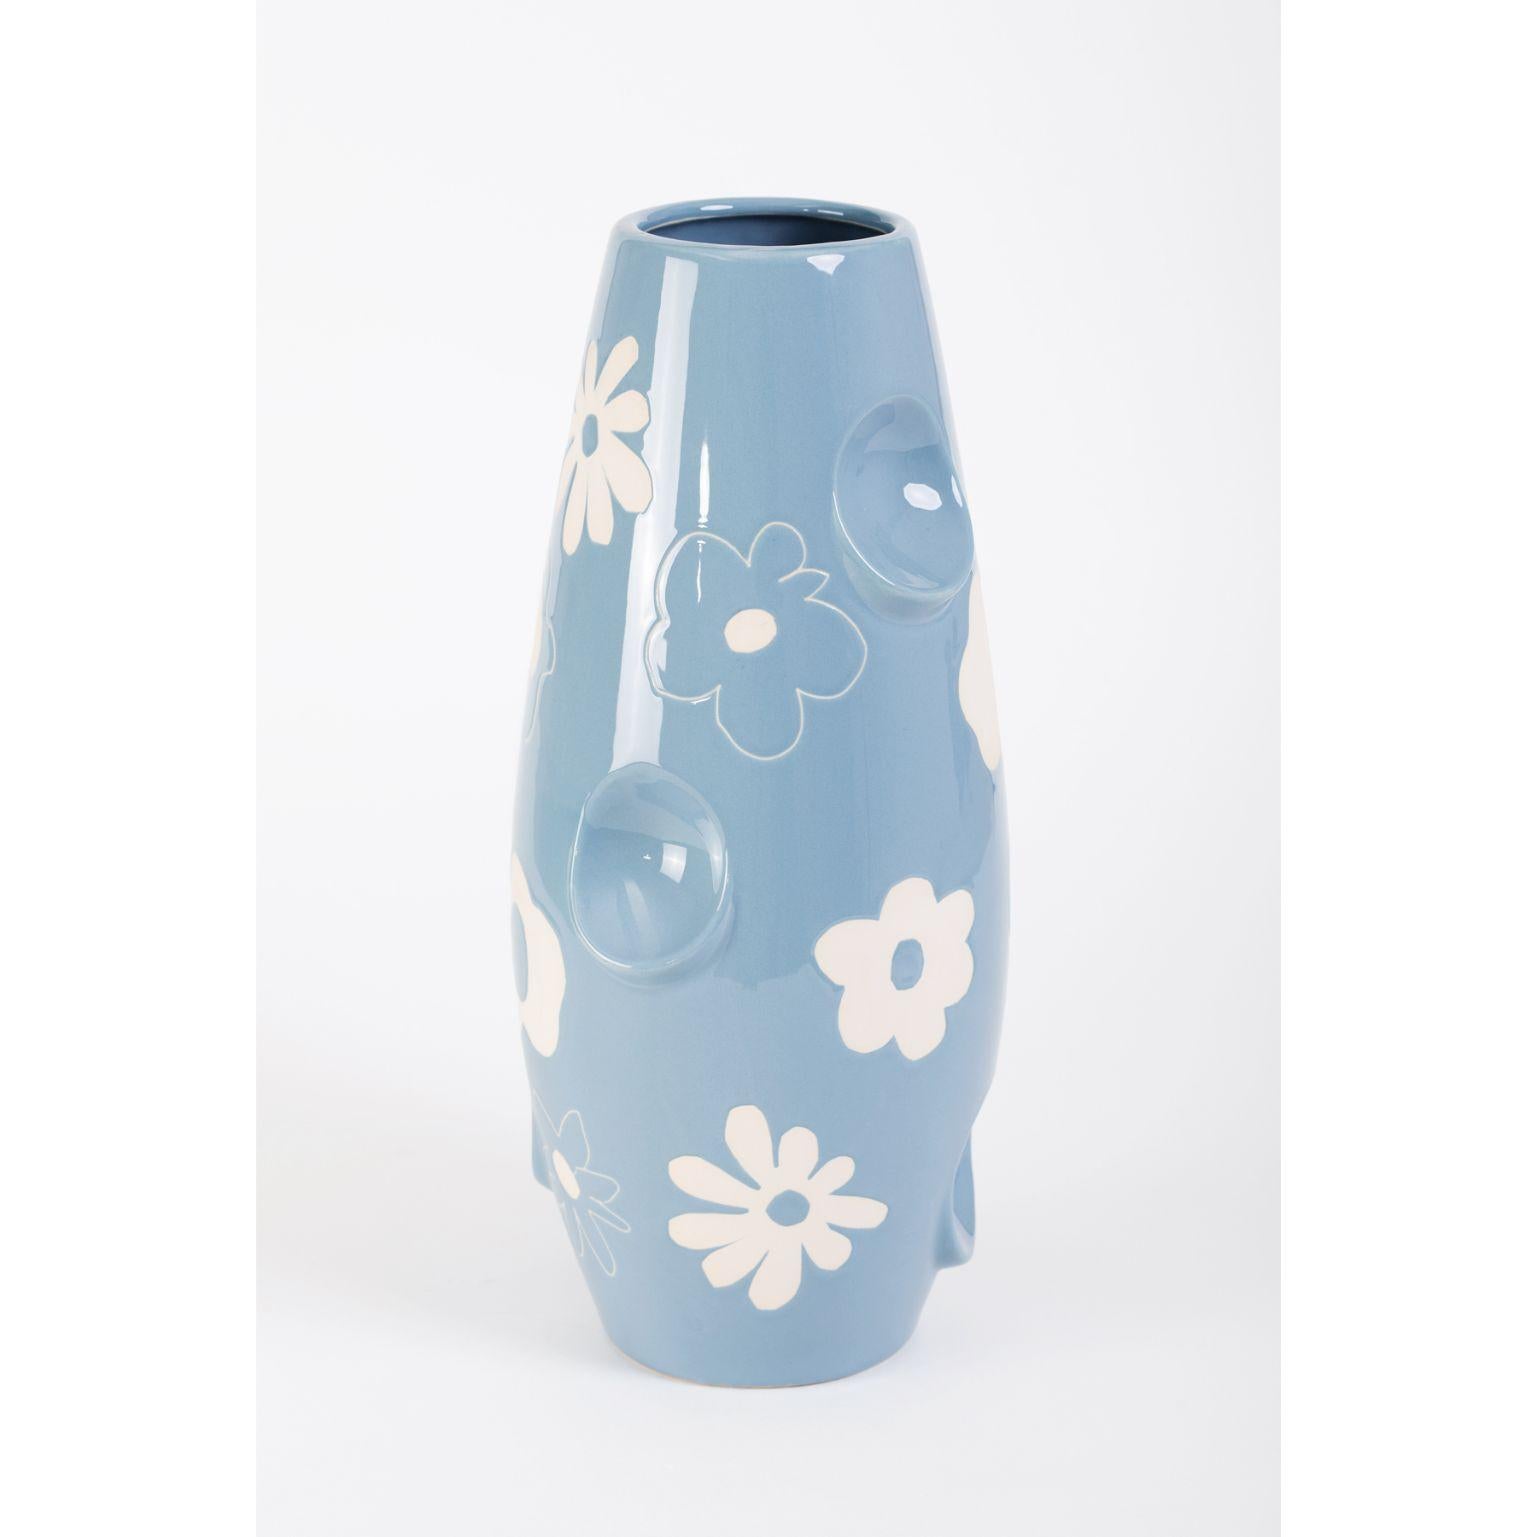 Oko Pop ceramic vase - Denim Daisy by Malwina Konopacka
Unique Sculpture ( Decorated and hand-painted by the artist )
Materials: Ceramic, Blue Glaze
Dimensions: D19, D42 cm

Also Available: Circus, Mushroom, Smiley
 
OKO came first and lent